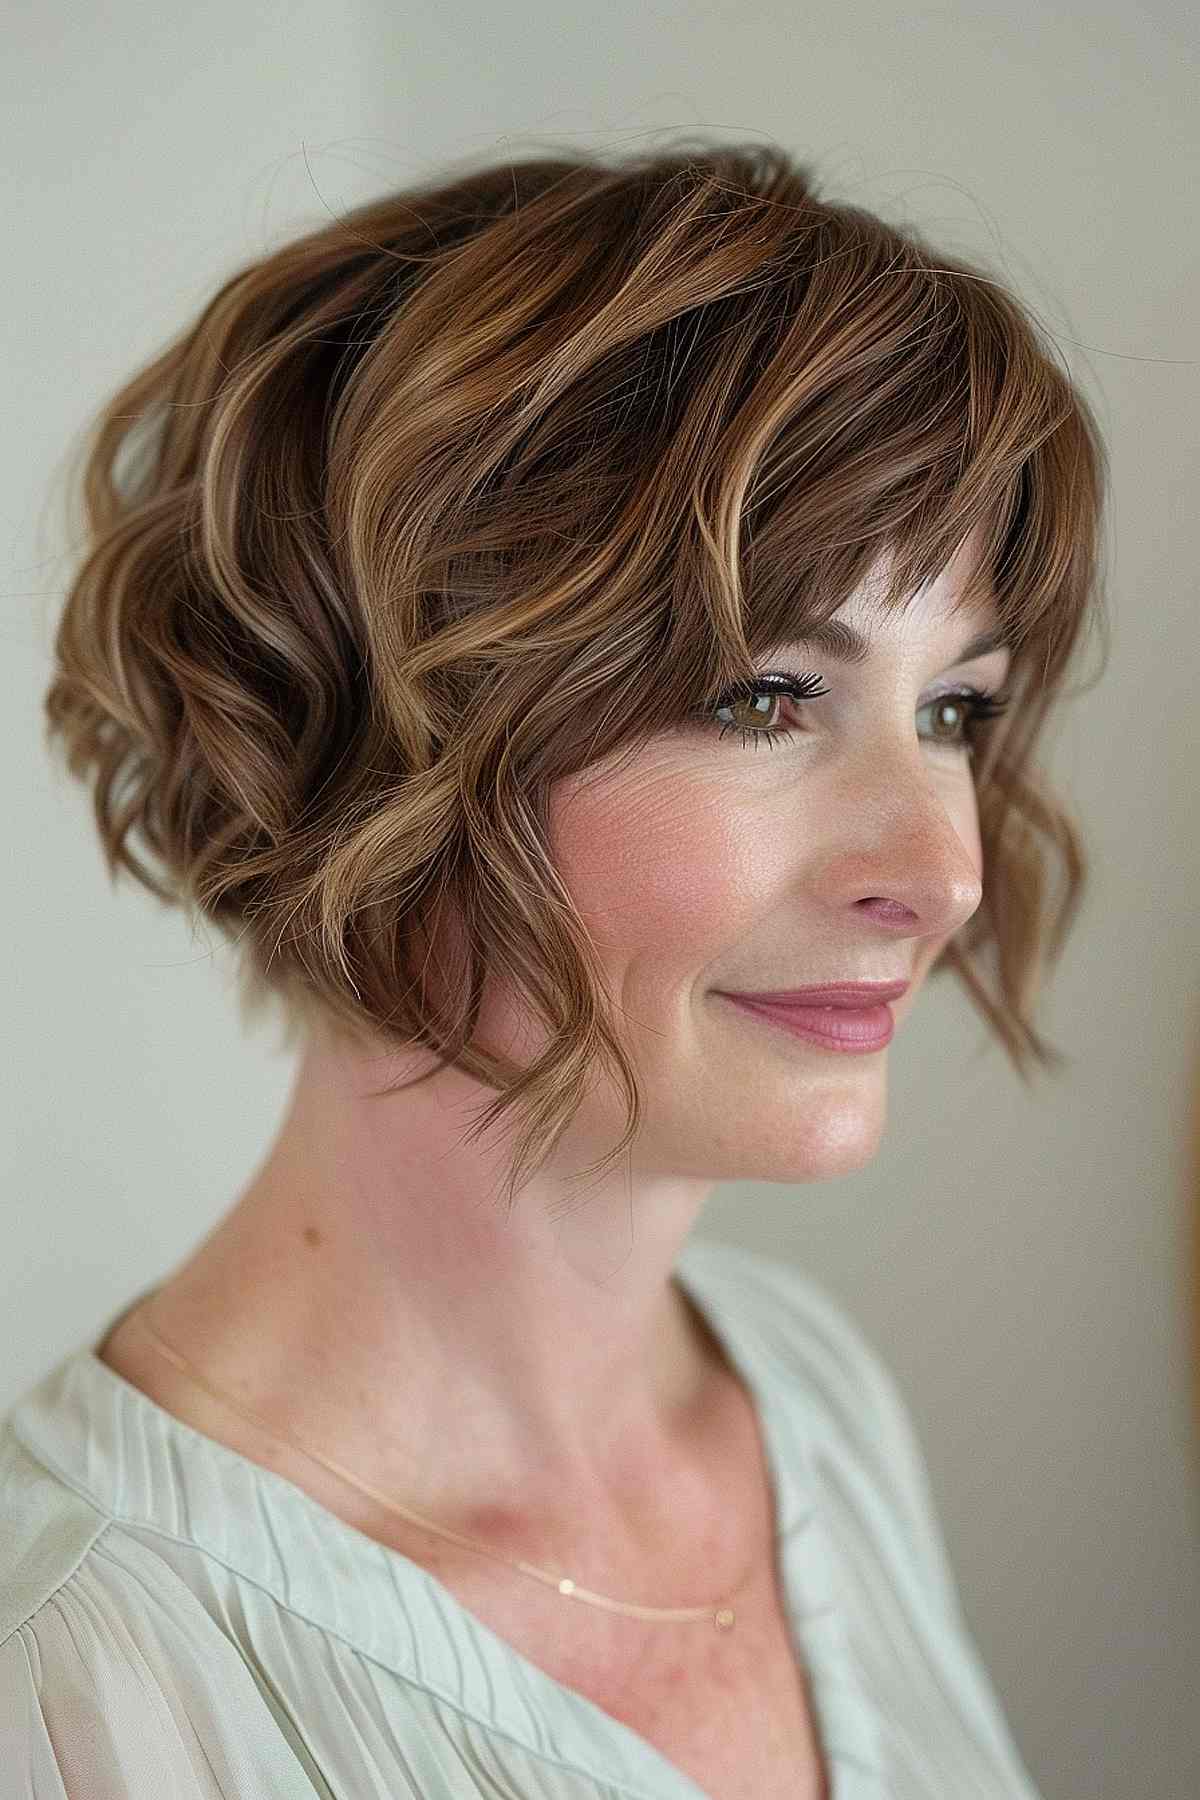 A voluminous chin-length bob with layers and thin bangs gives a youthful and playful look.